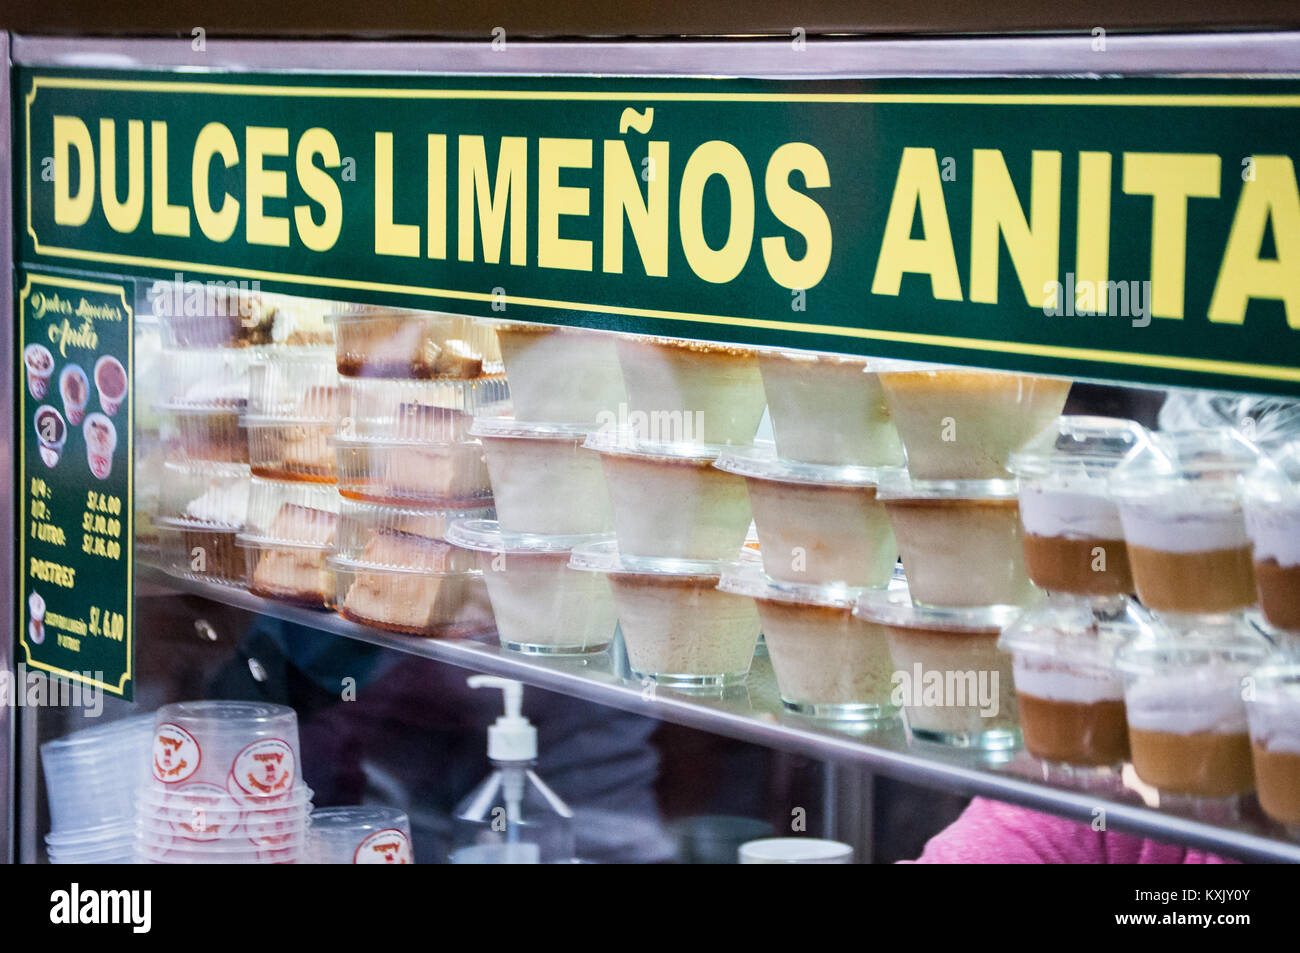 Street food stall in Peru selling typical desserts from Lima including Suspiro de Limena a very sweet meringue and condensed milk treat. Stock Photo